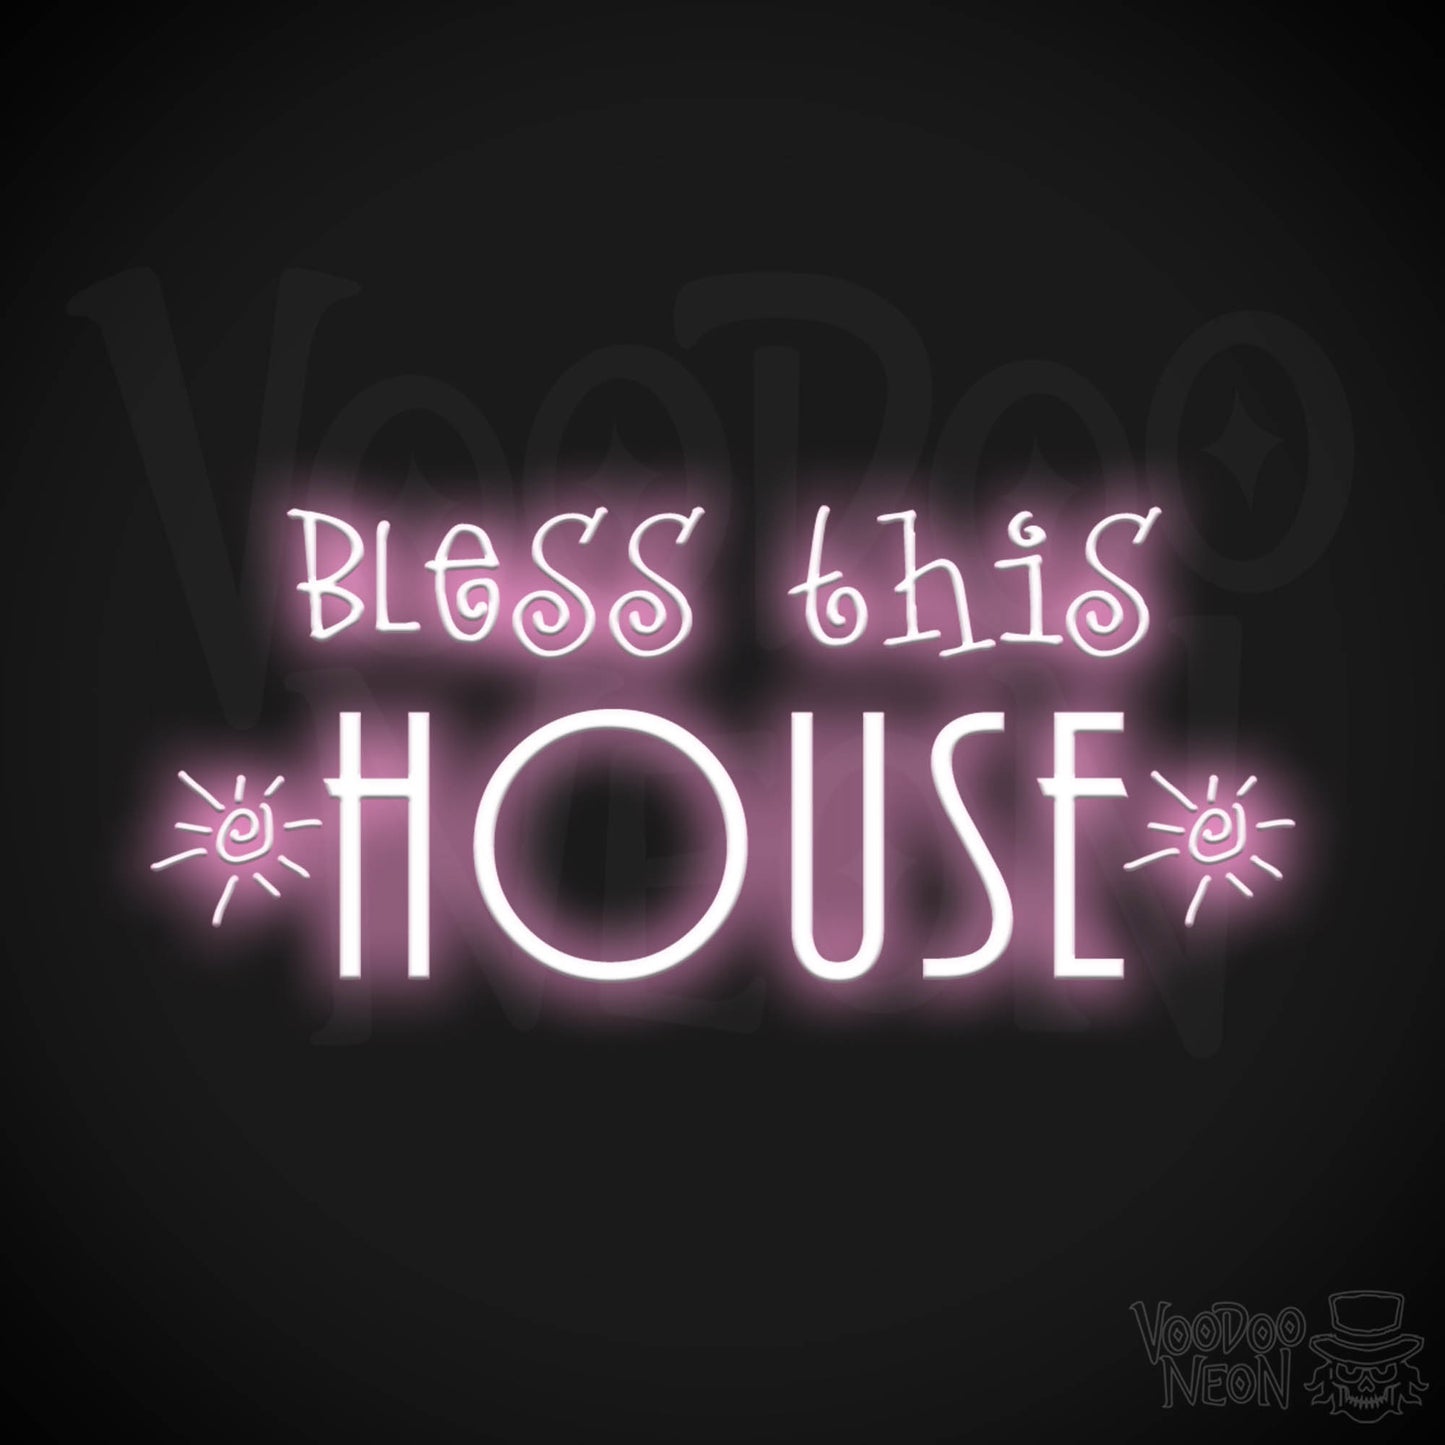 Bless This House Neon Sign - Neon Bless This House Sign - LED Light Up Sign - Color Light Pink